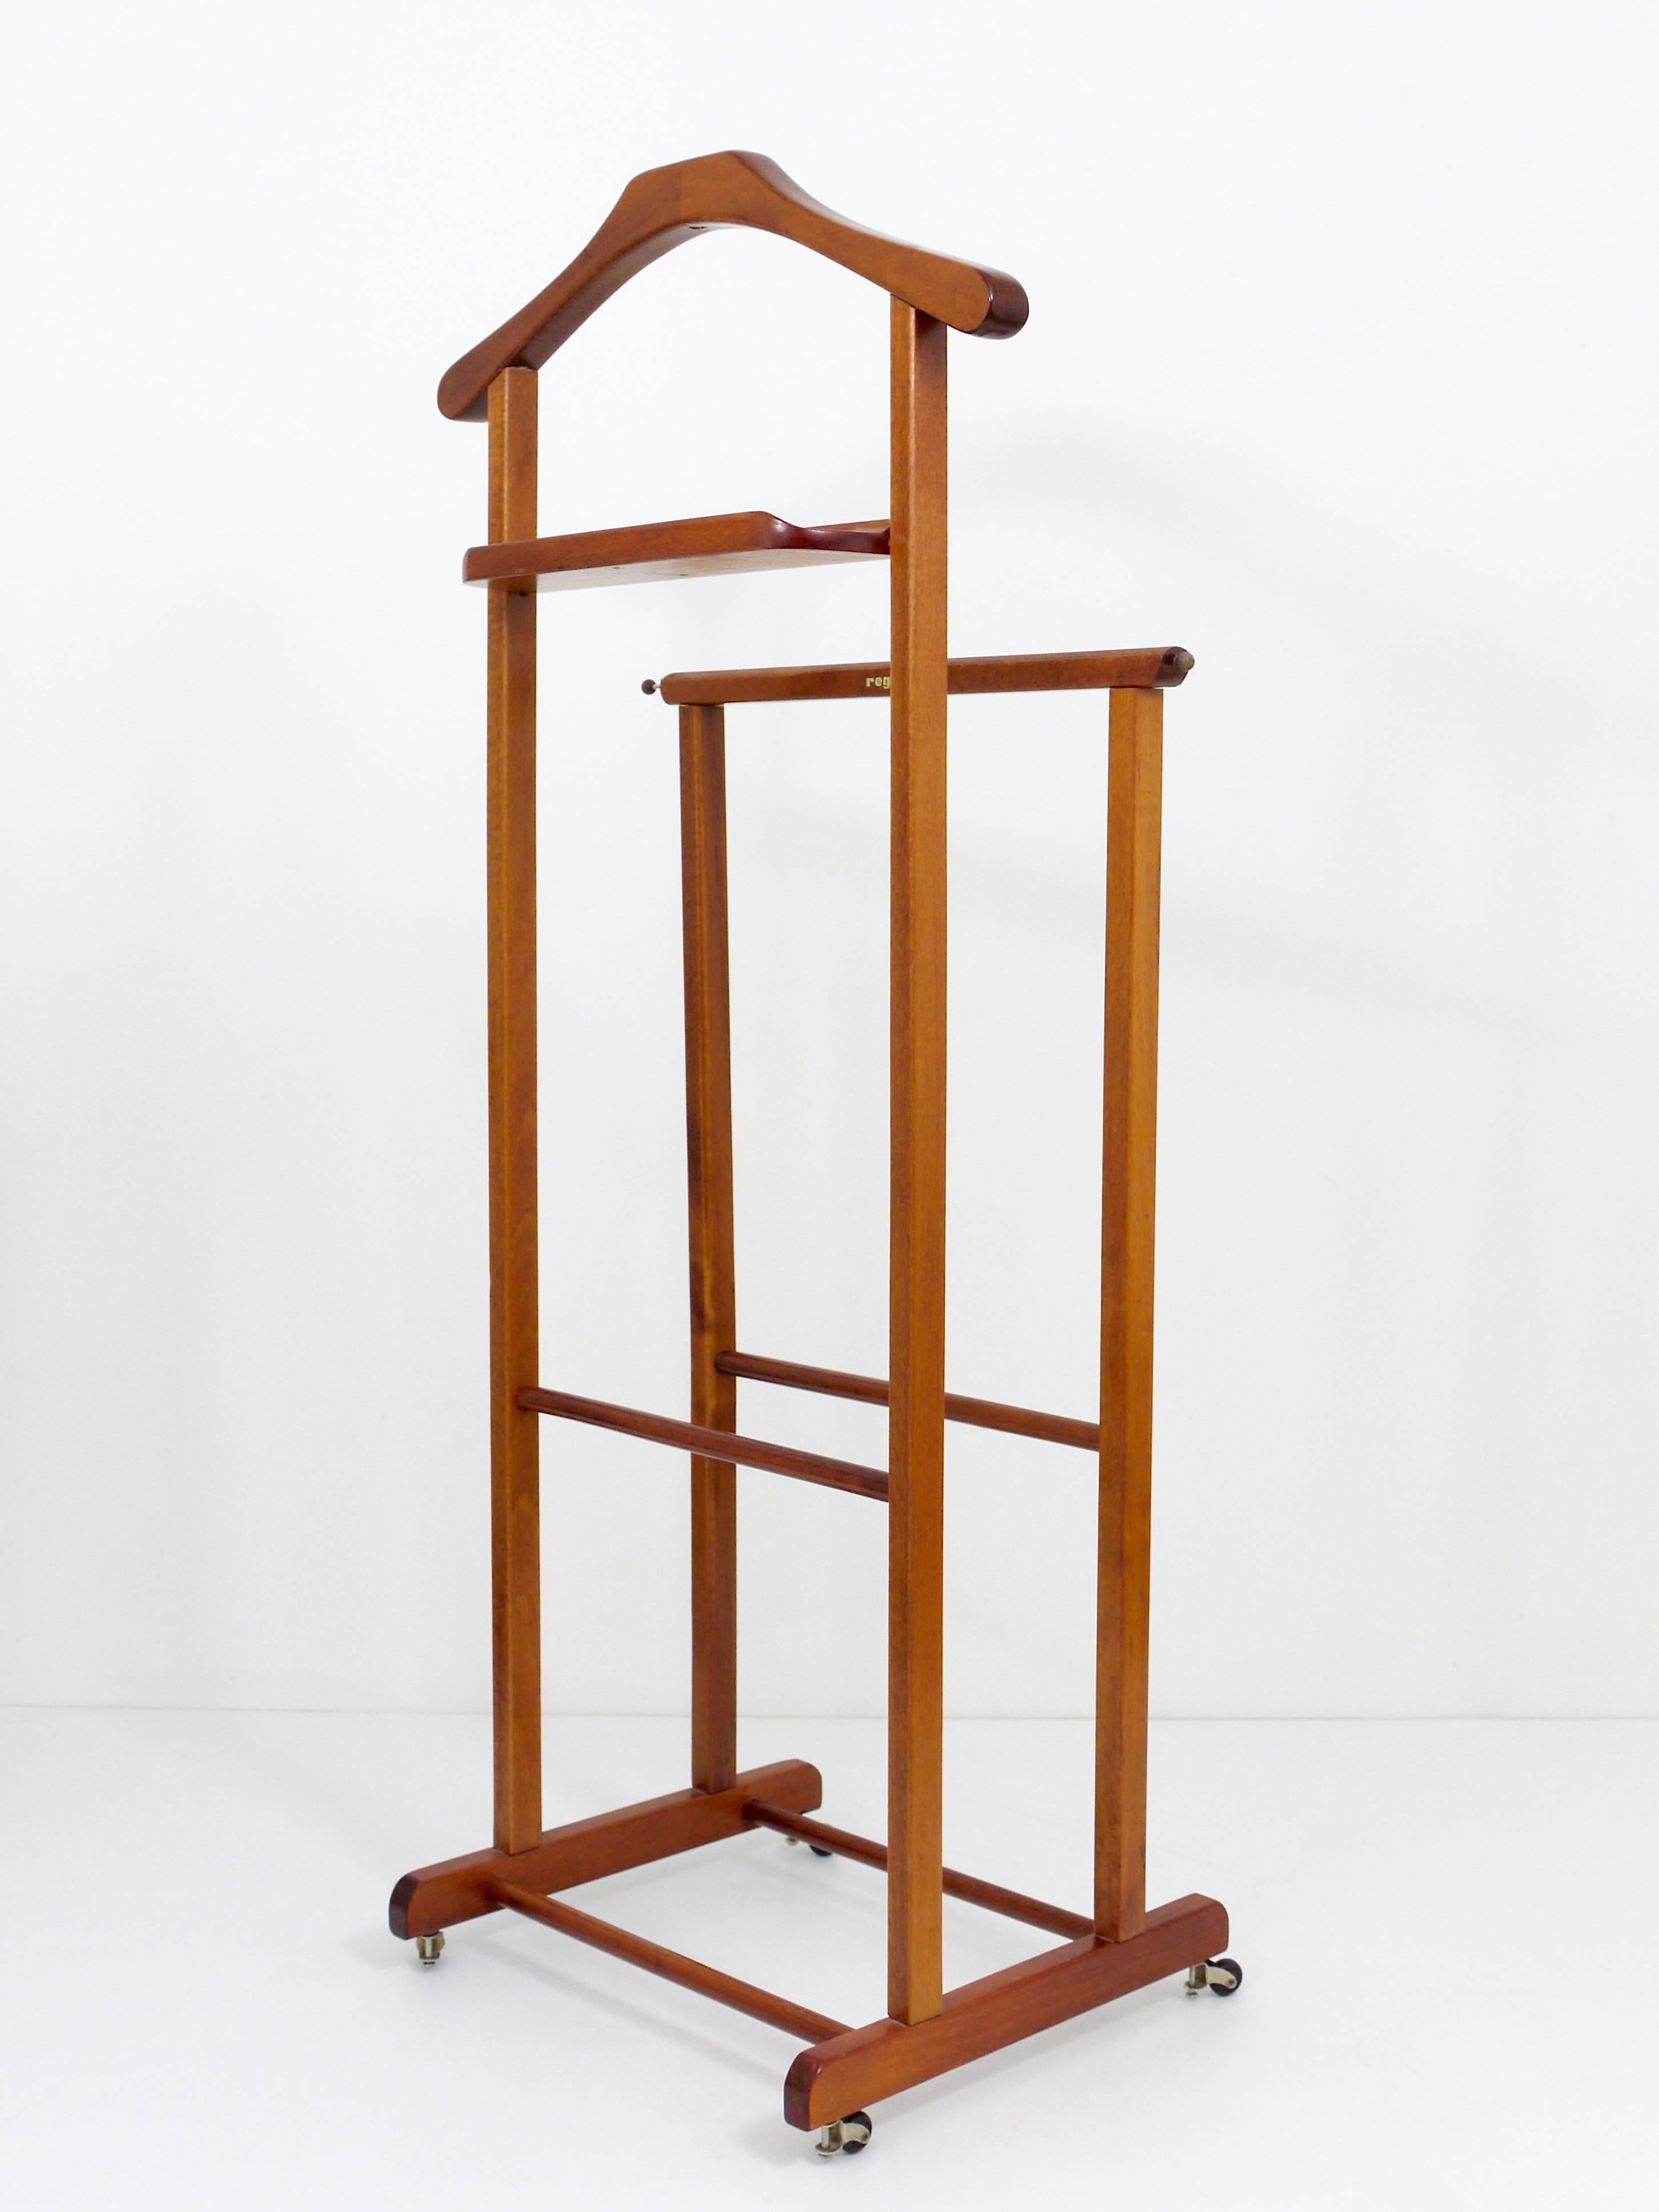 Beautiful modernist valet stand, made of wood with nice details, designed by Ico Parisi for Fratelli Reguitti. In excellent condition, marked with the manufacturers label.